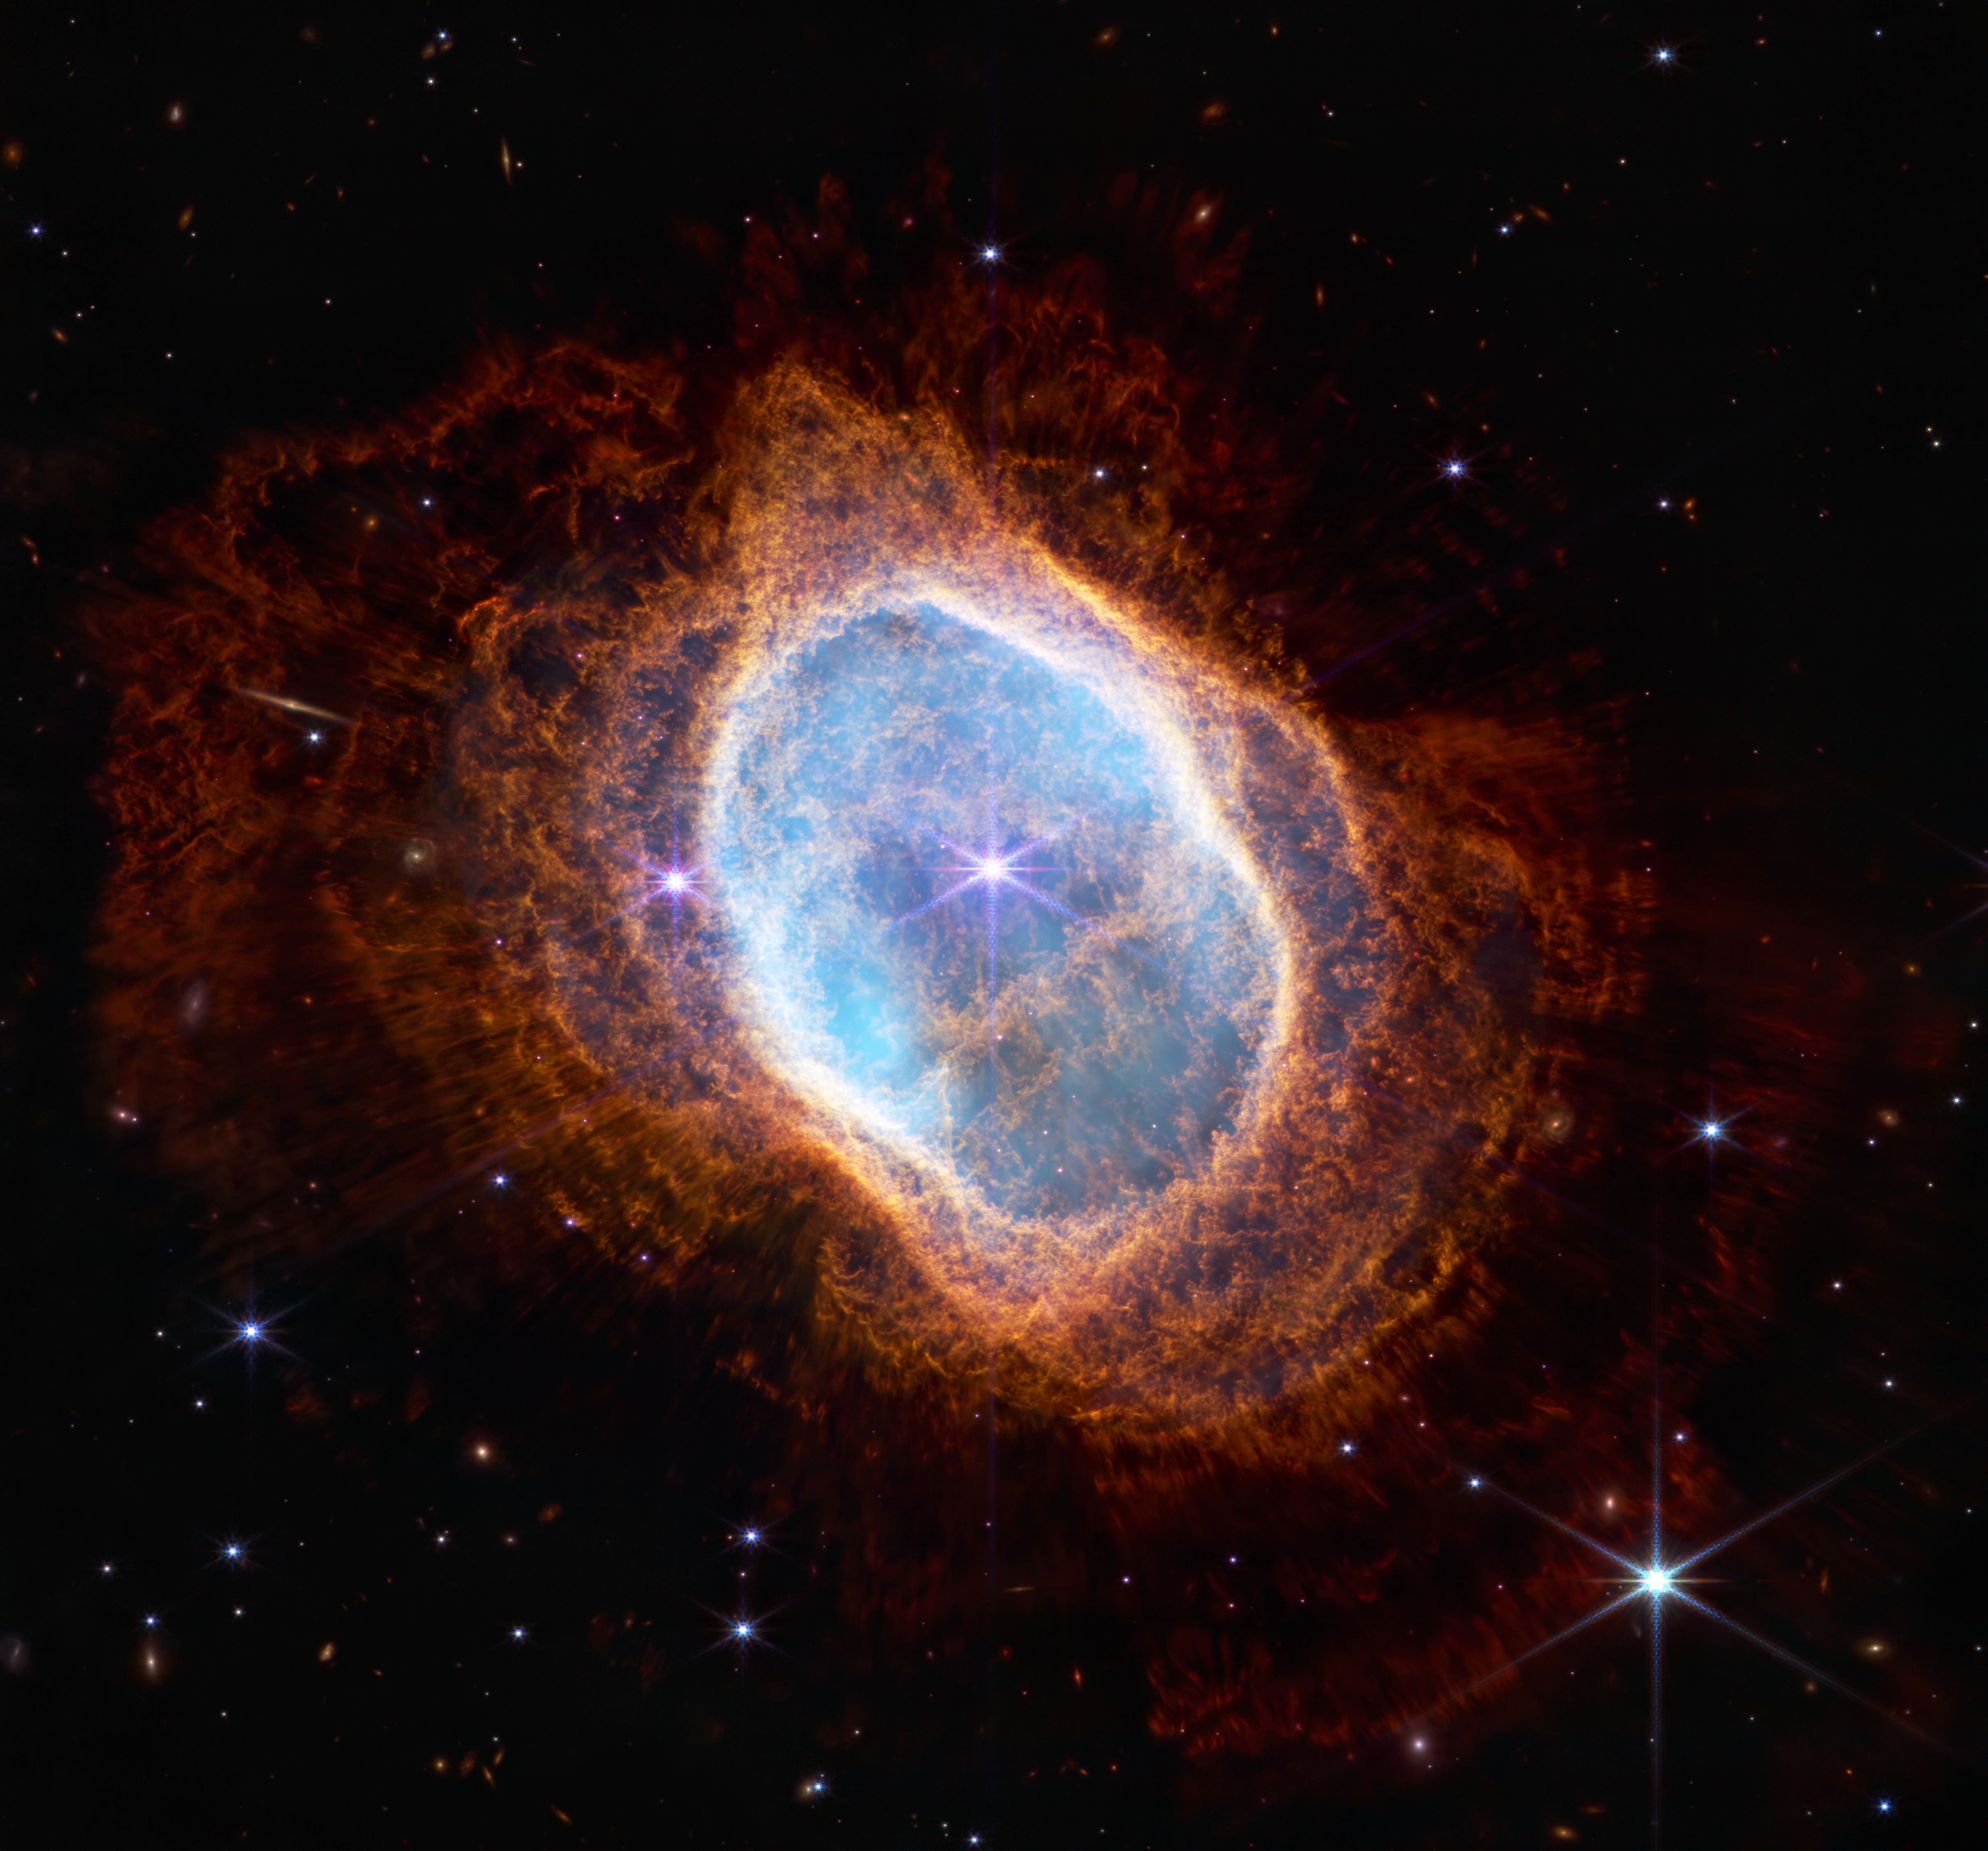 Colorful image of near-infrared light from a glowing cloud with a distorted ring-like shape, illuminated from within by a bright central star. The Southern Ring Nebula is a large, semi-transparent oval that is slightly angled from top left to bottom right. A bright white star appears at the center of this image. A large transparent teal oval surrounds the central star. Several red shells surround the teal oval, extending almost to the edges of the image. The shells become a deeper red with distance from the center. The bright central star has eight diffraction spikes. Behind the gaseous teal layers are deeper orange layers that are arranged like threads in a complex weaving. The red layers, which are wavy overall, look like they have very thin straight lines piercing through them, which are holes where light from a central star is traveling. The background of the image is black and speckled with tiny bright stars and distant galaxies.